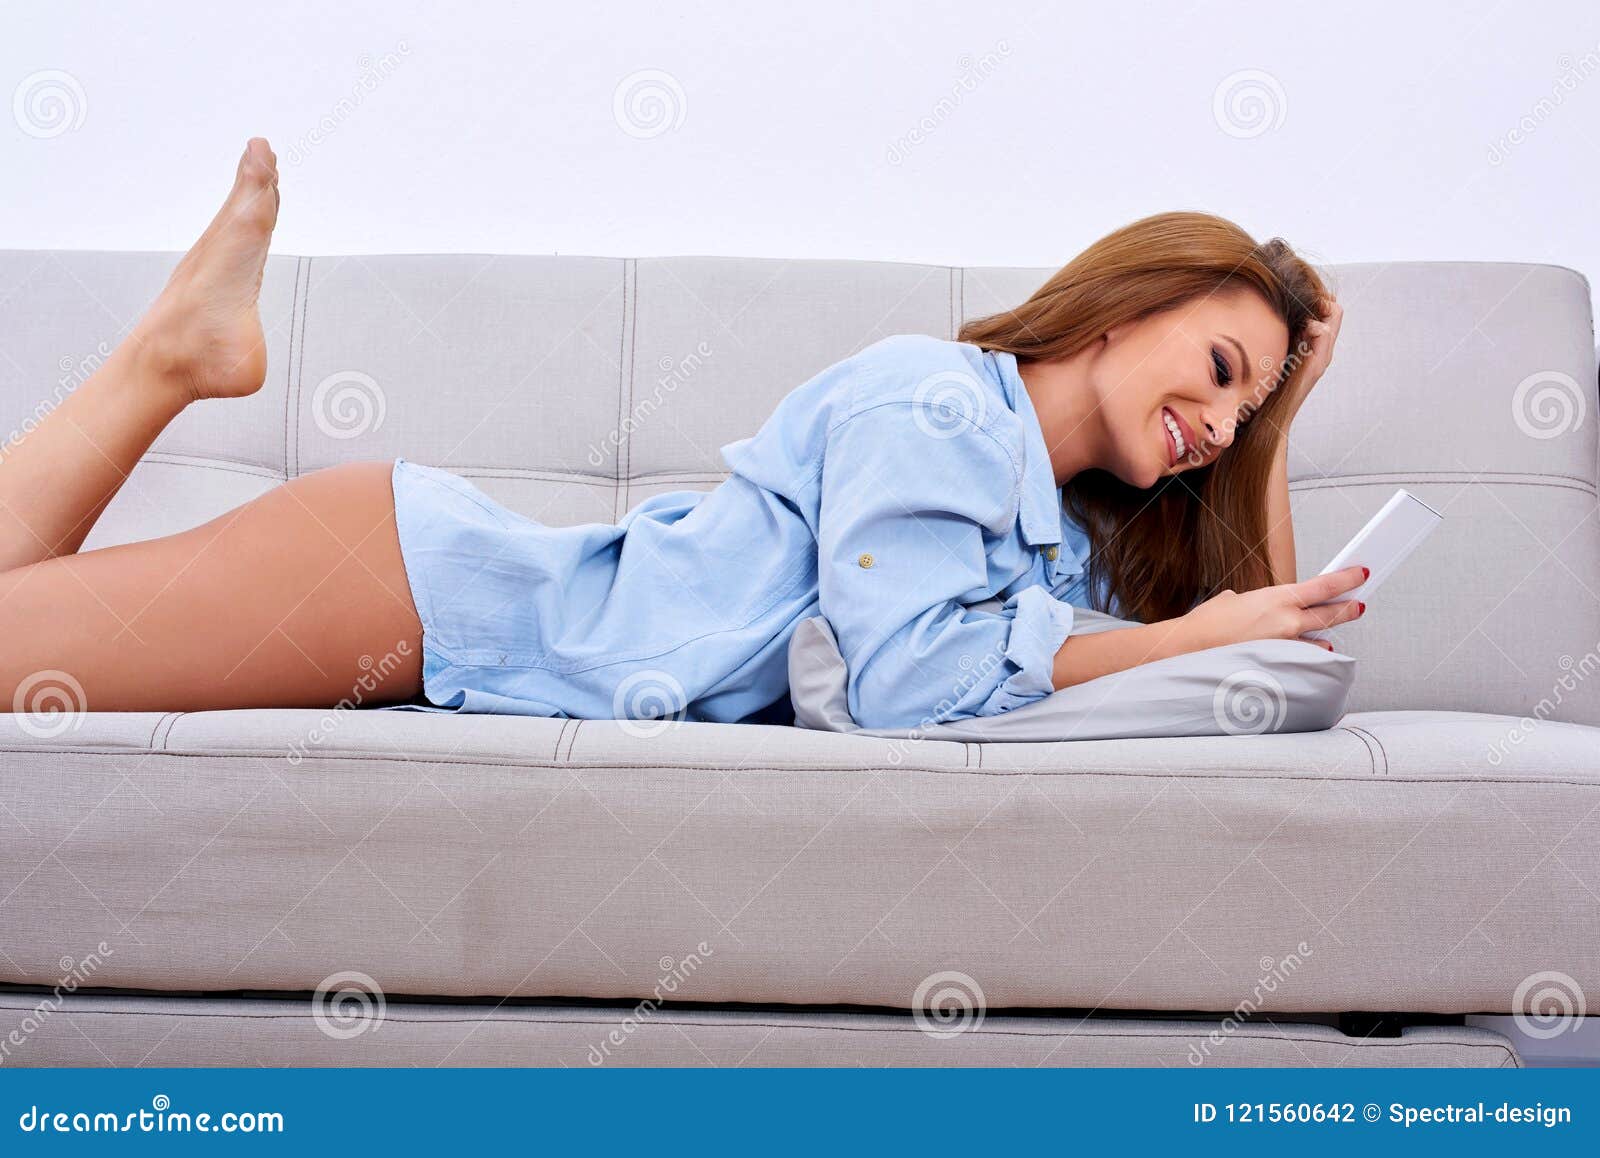 A Smiling Woman Laying on a Sofa and Using Her Smartphone Photo - Image of phone, nude: 121560642